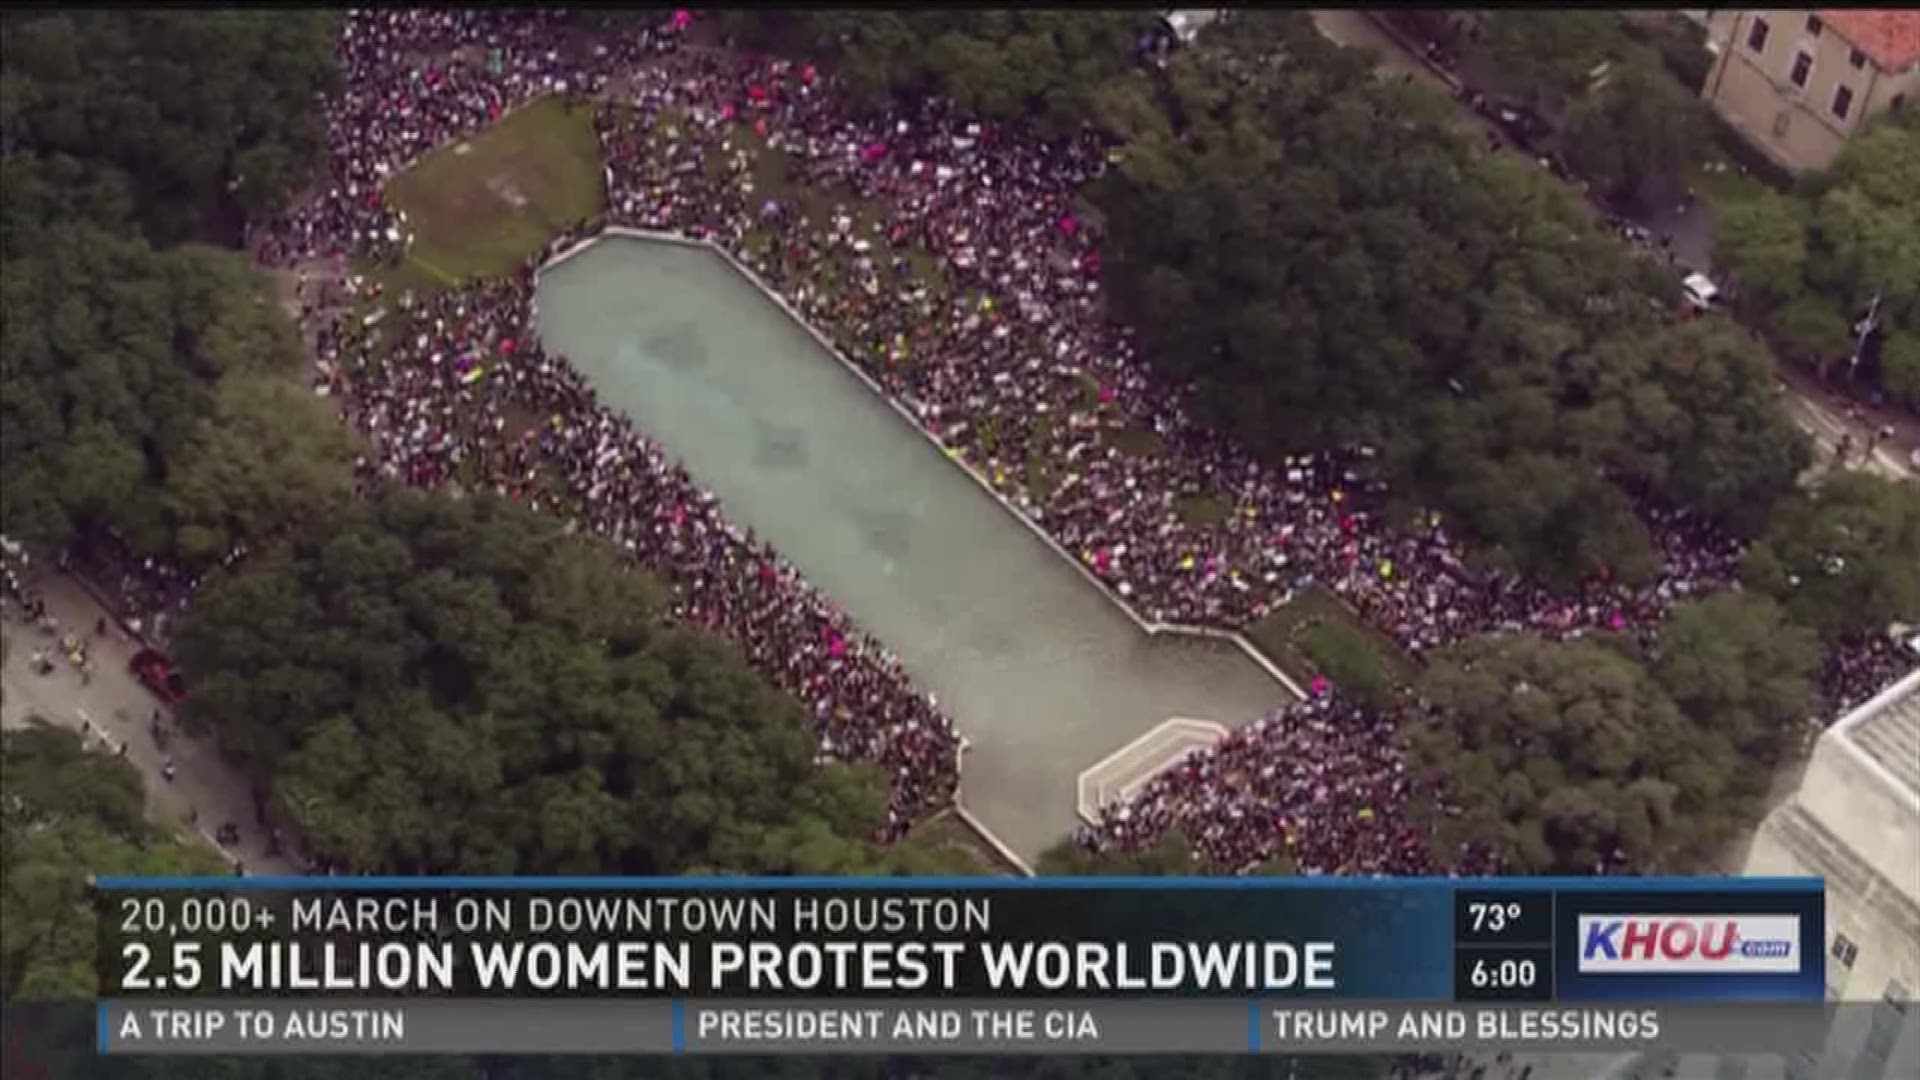 More than 20,000 people were in downtown Houston for the Women's March. More than 2 million people marched for women's rights all over the world on Saturday. 